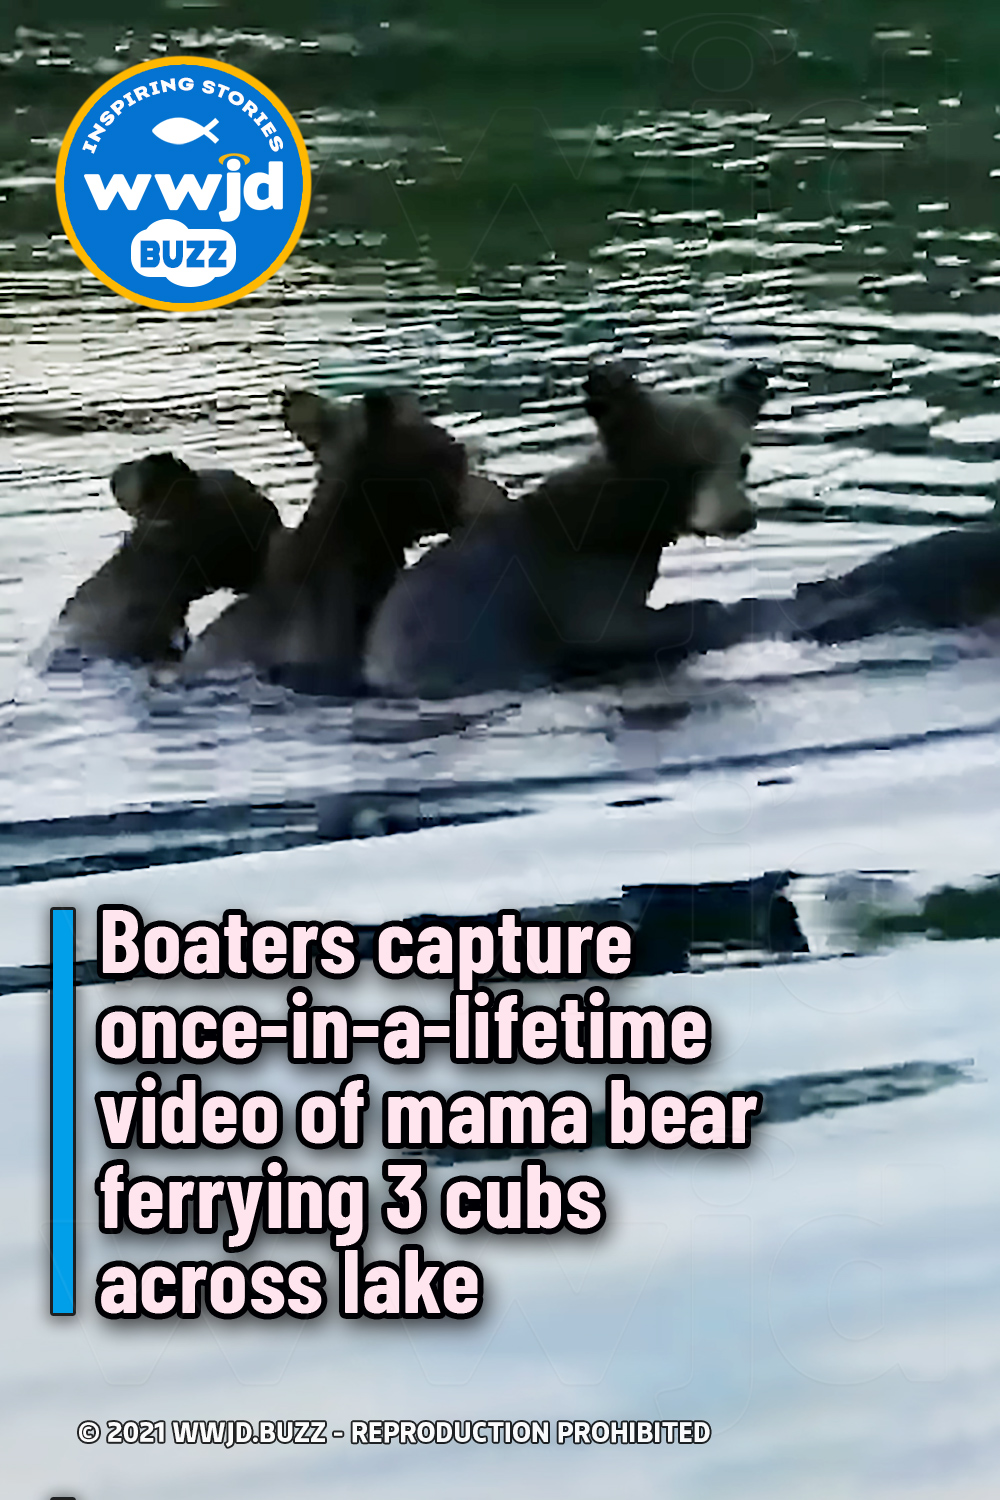 Boaters capture once-in-a-lifetime video of mama bear ferrying 3 cubs across lake